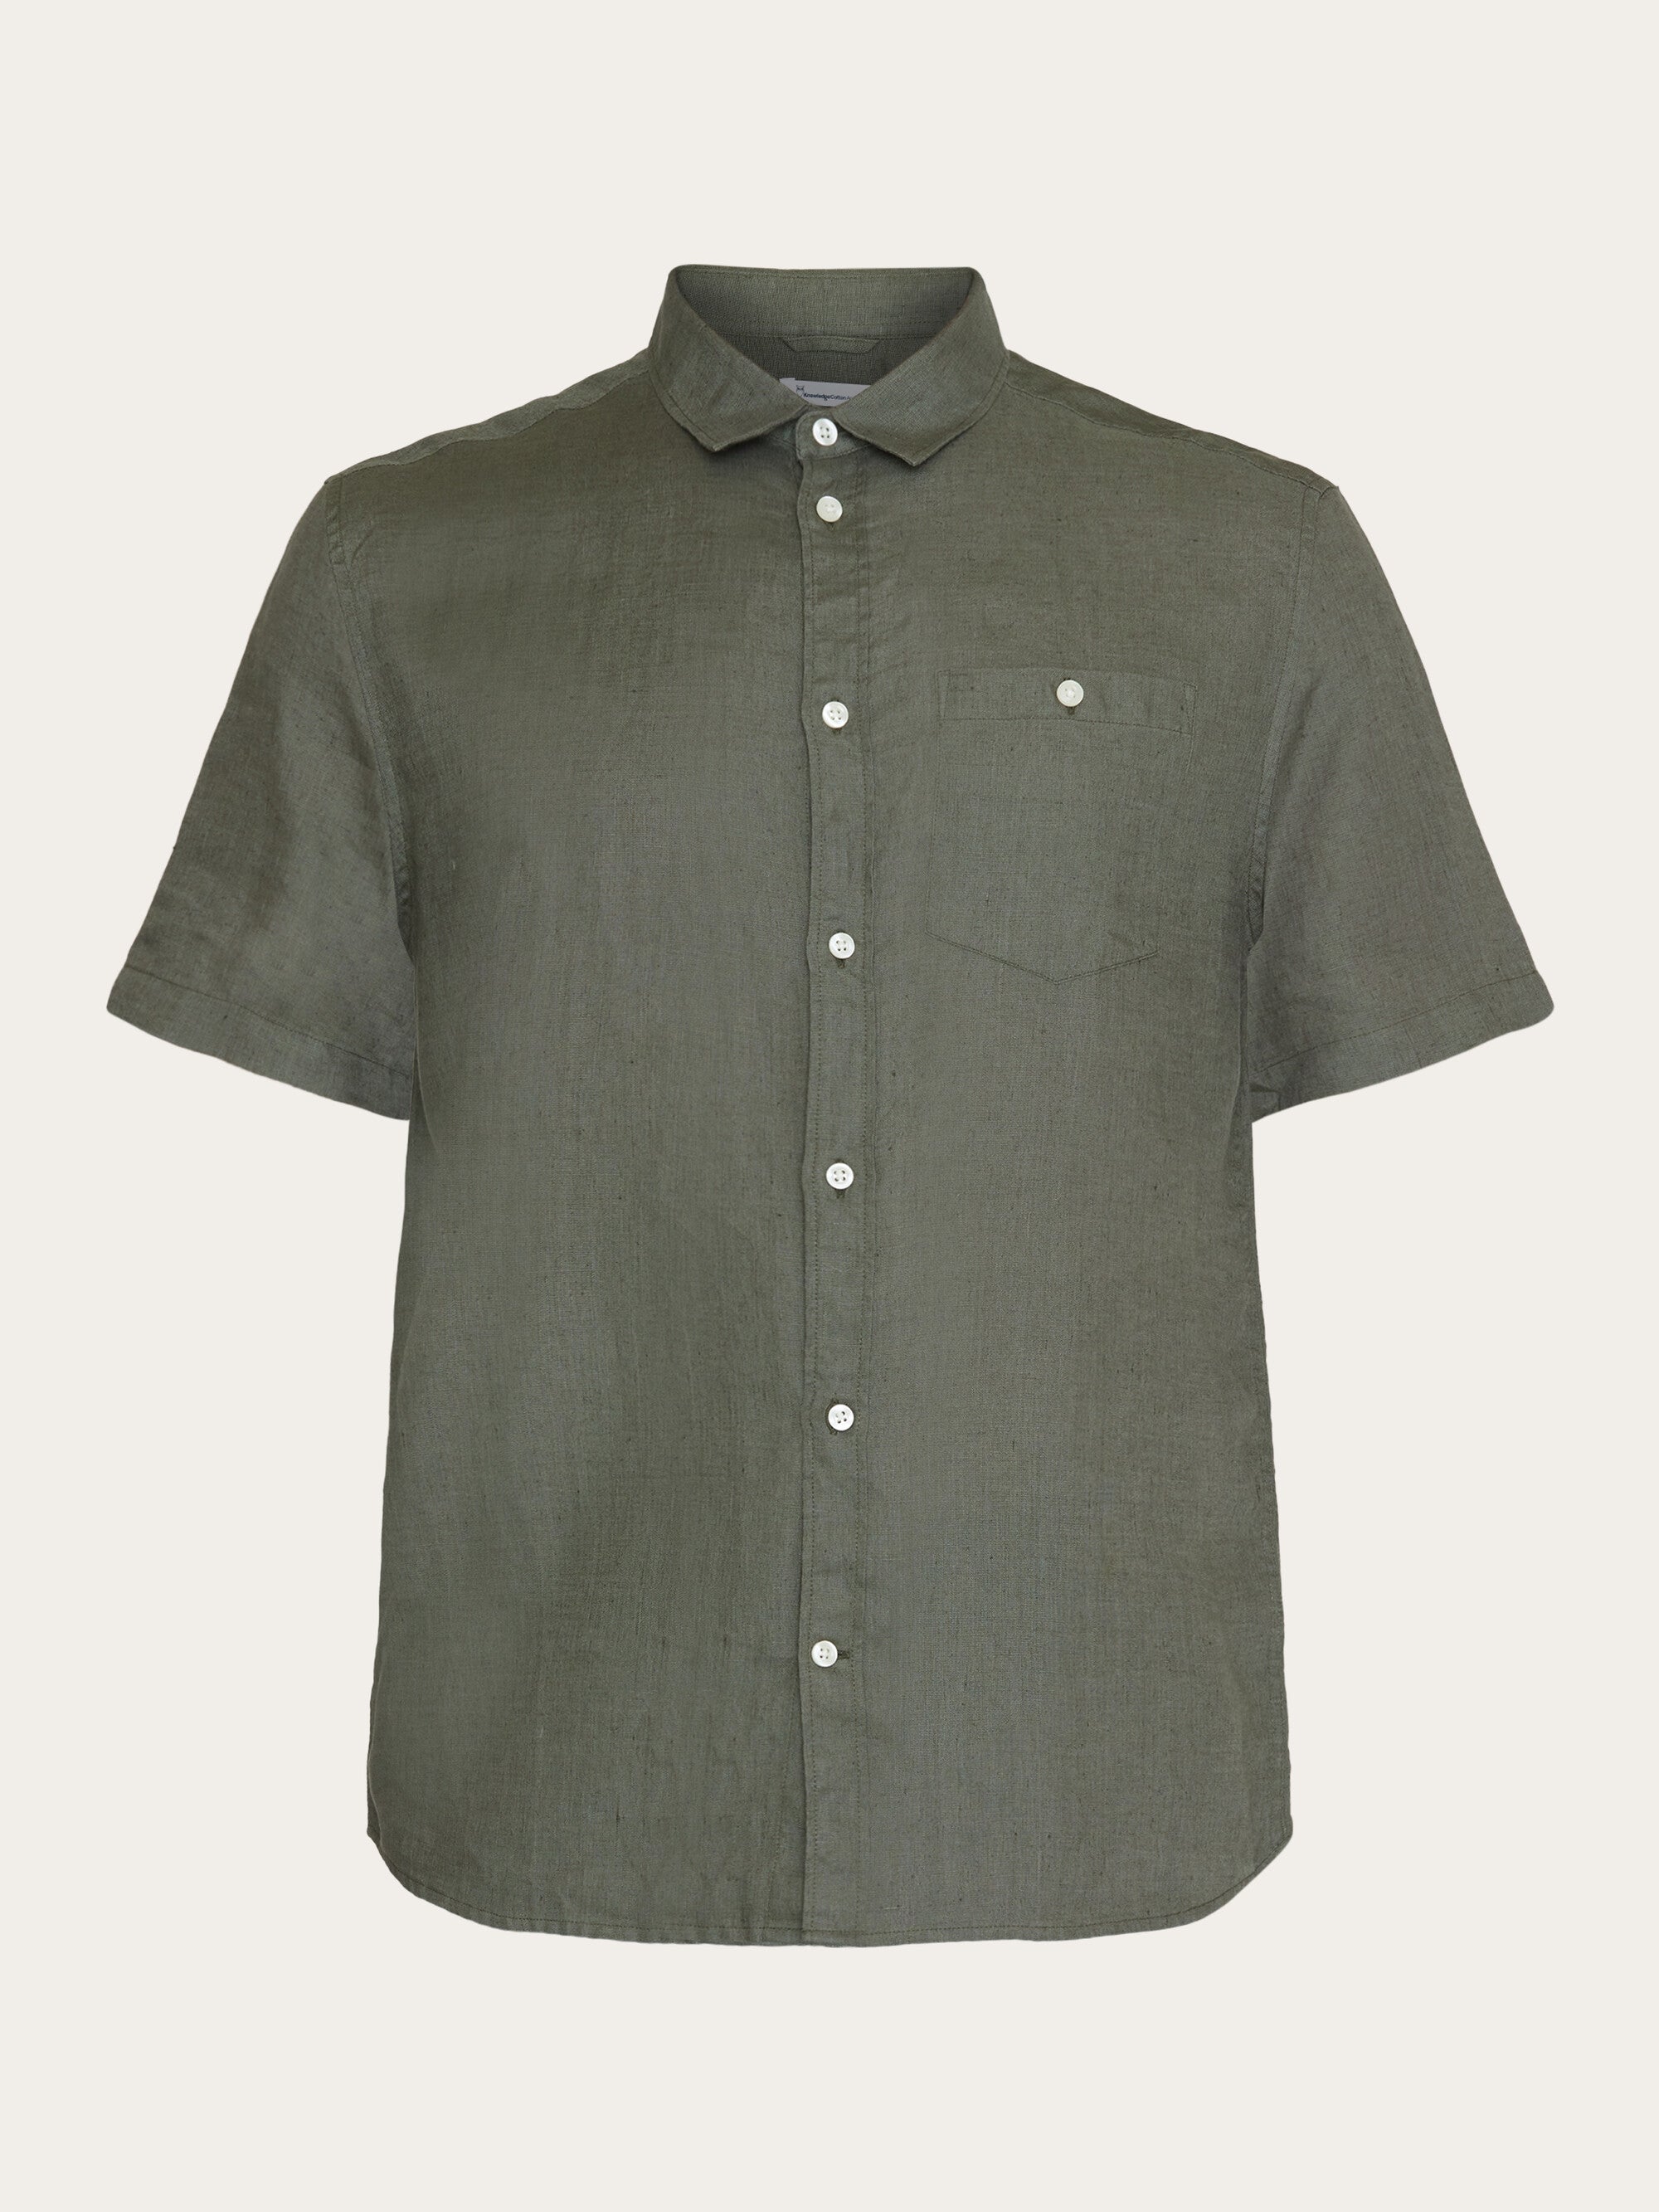 Buy Custom fit linen short sleeve shirt - Burned Olive - from  KnowledgeCotton Apparel®